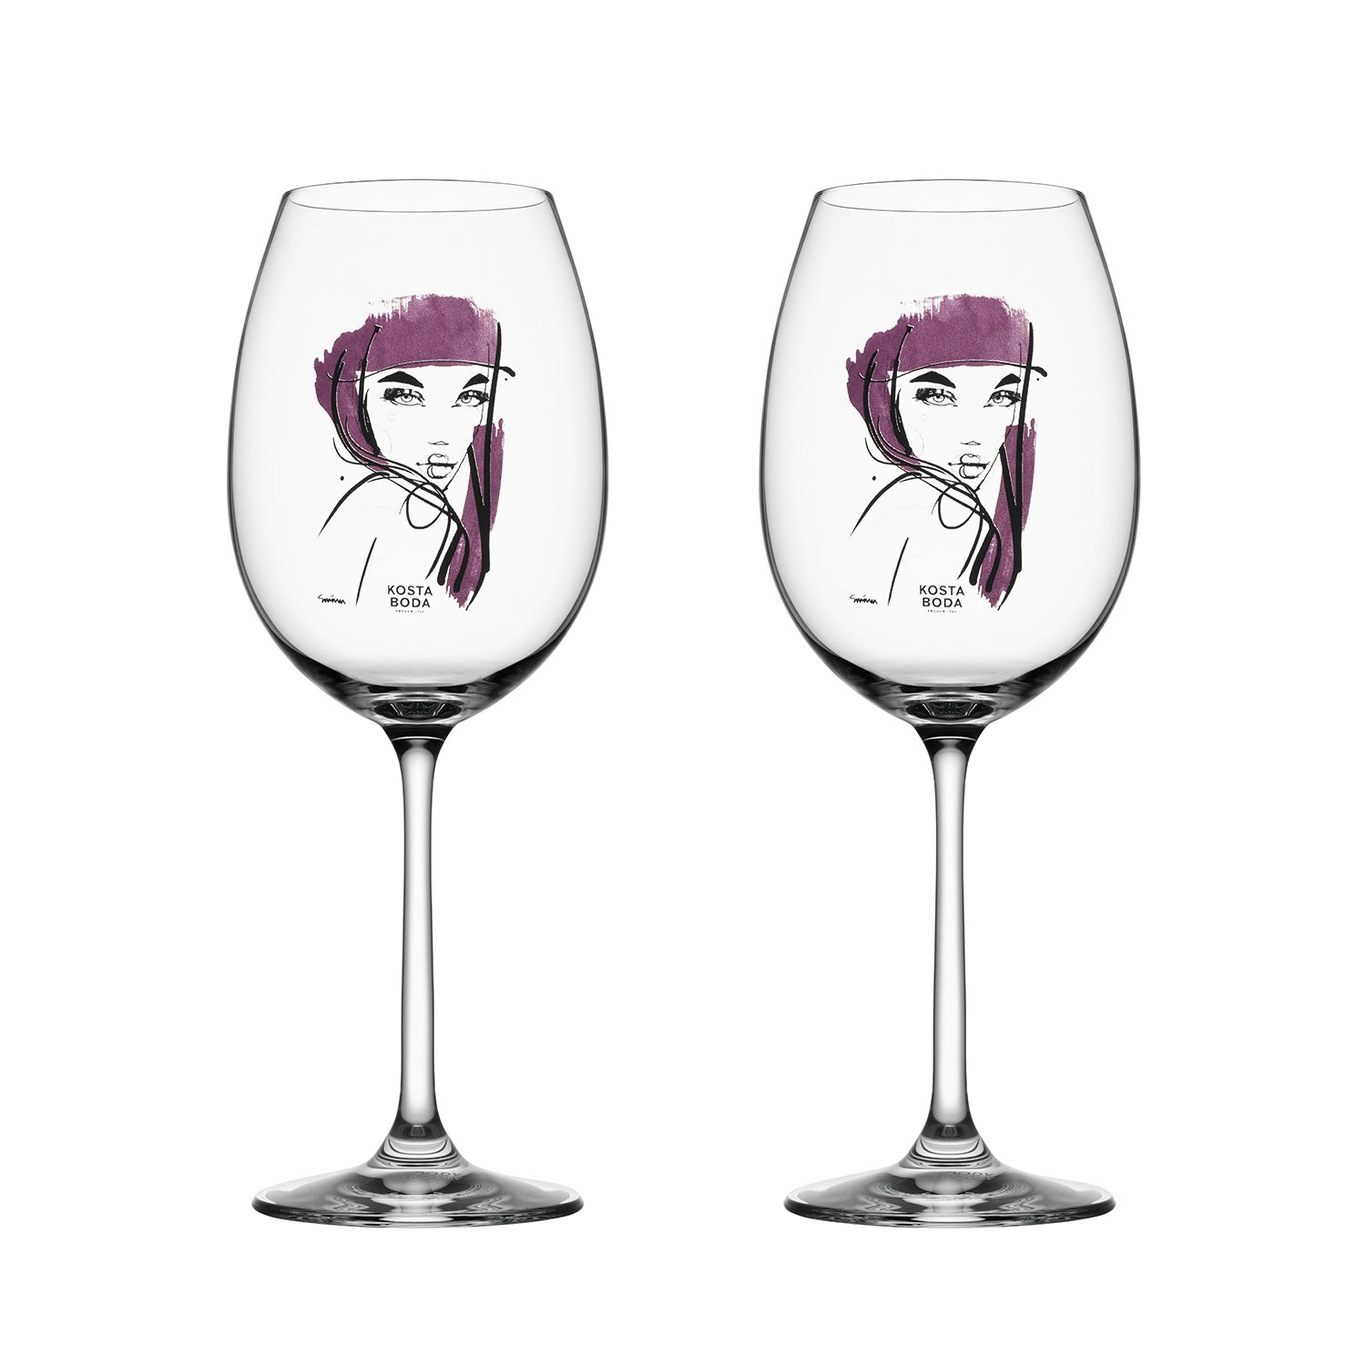 All About You Wine Glass 52 cl 2-pack, With You